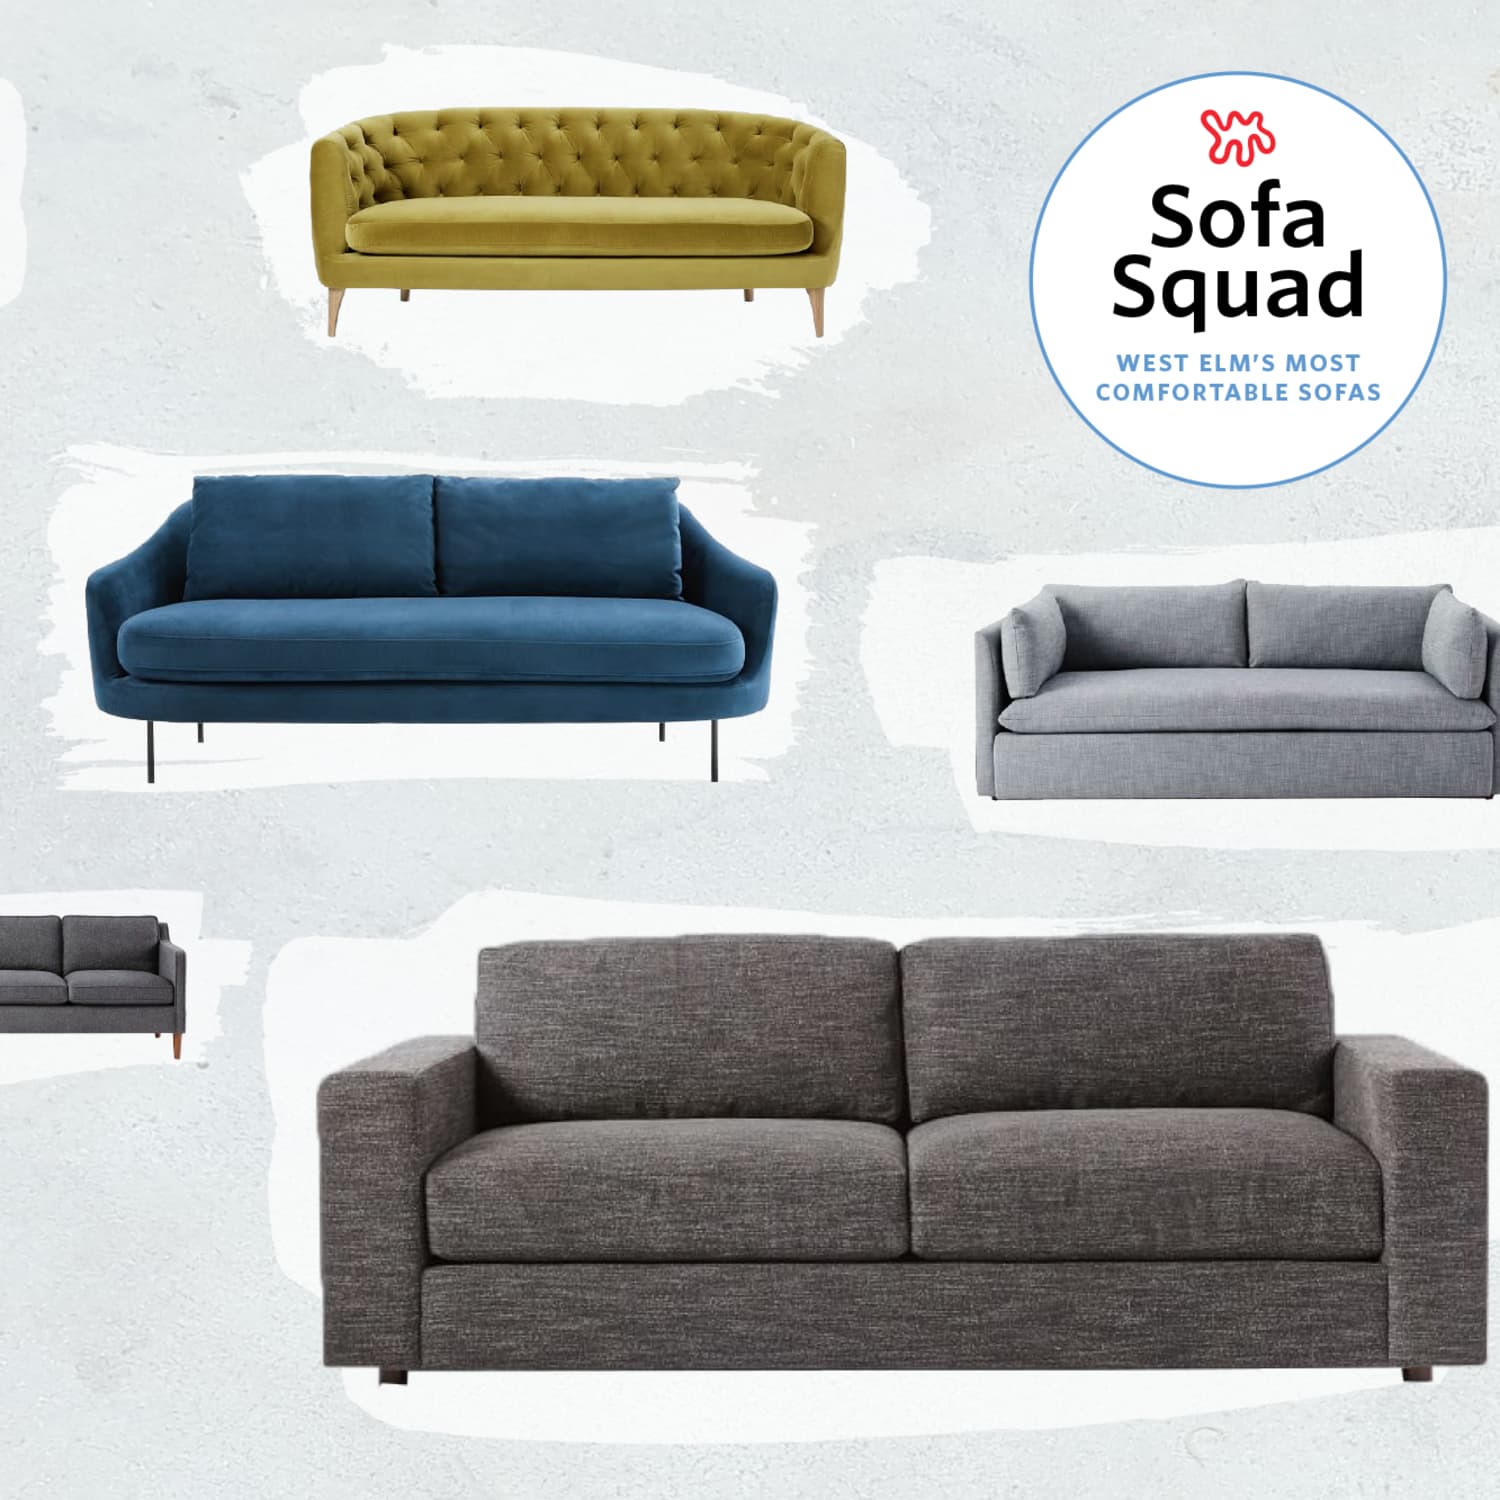 The Most Comfortable Sofas At West Elm Tested Reviewed Apartment Therapy,Clearest Ocean Water In The Us